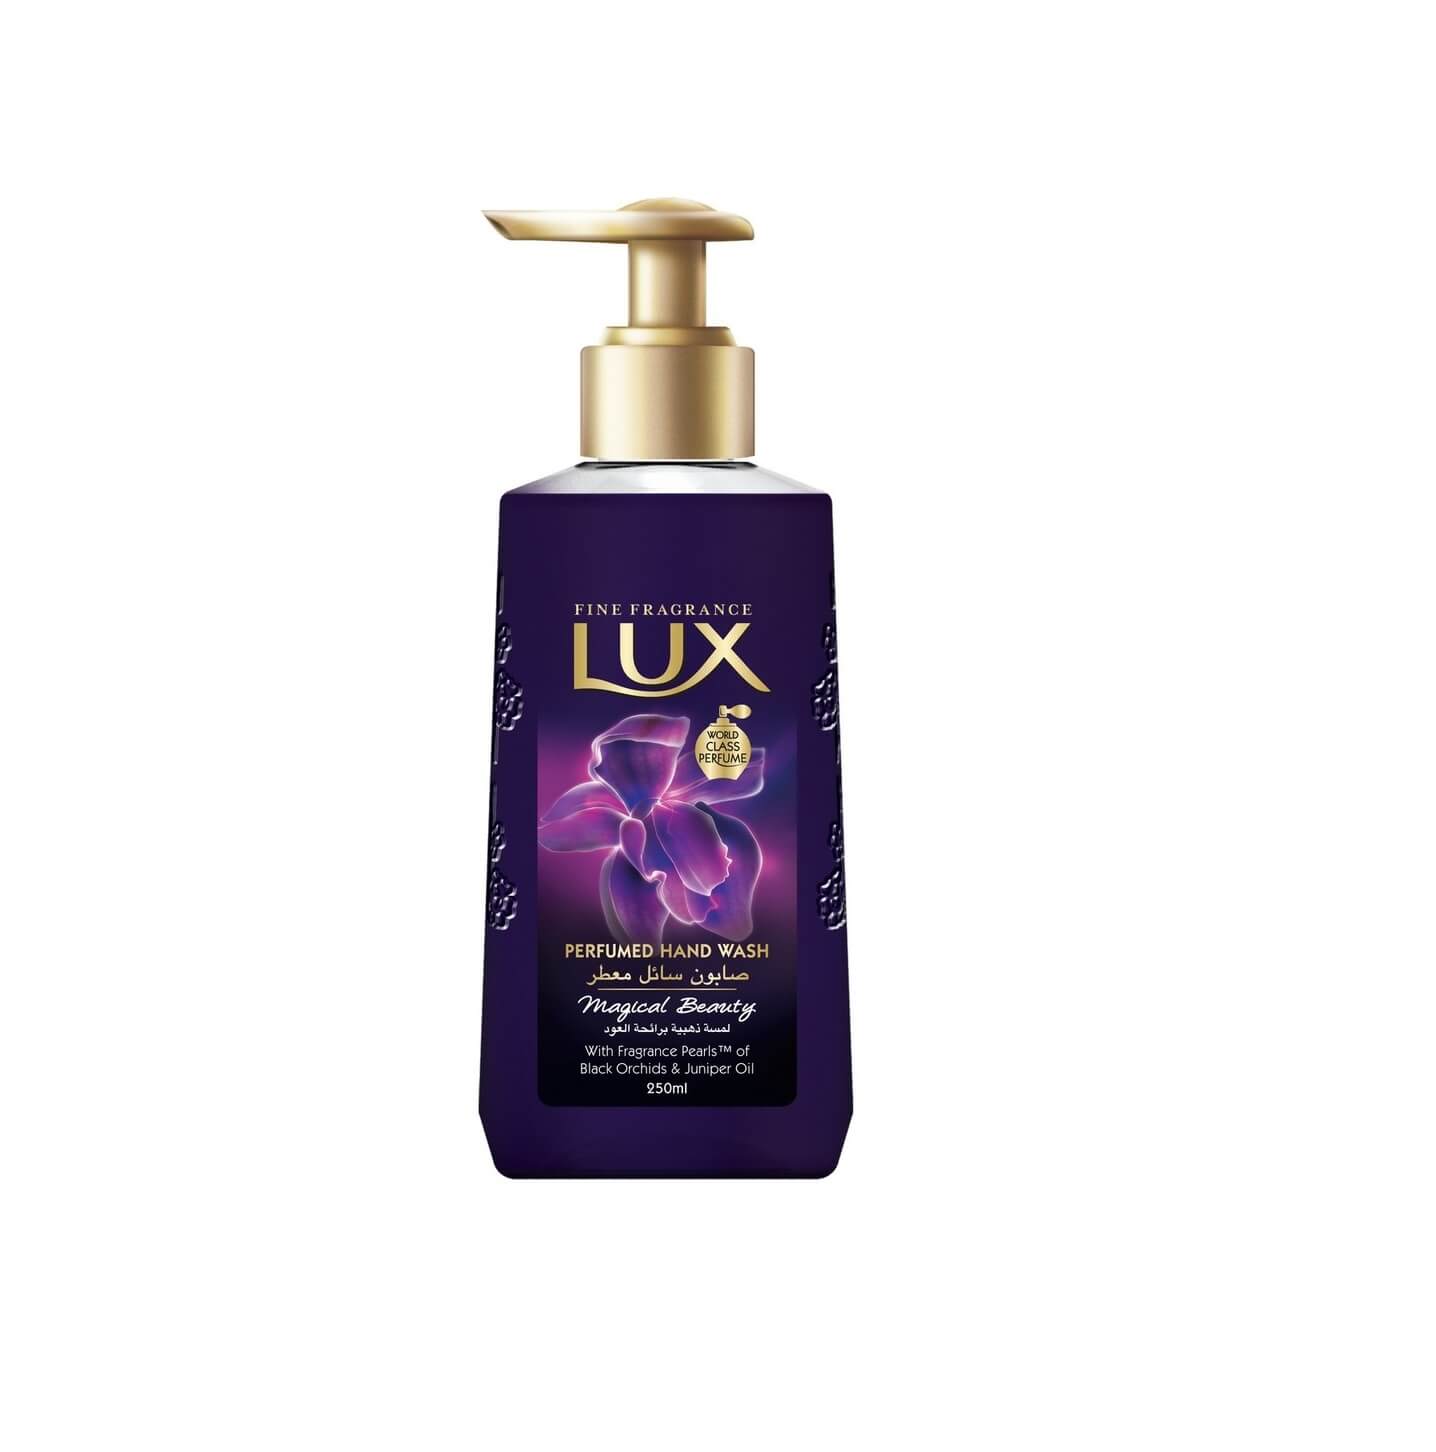 Lux Perfumed Hand Wash Magical Beauty 250ml